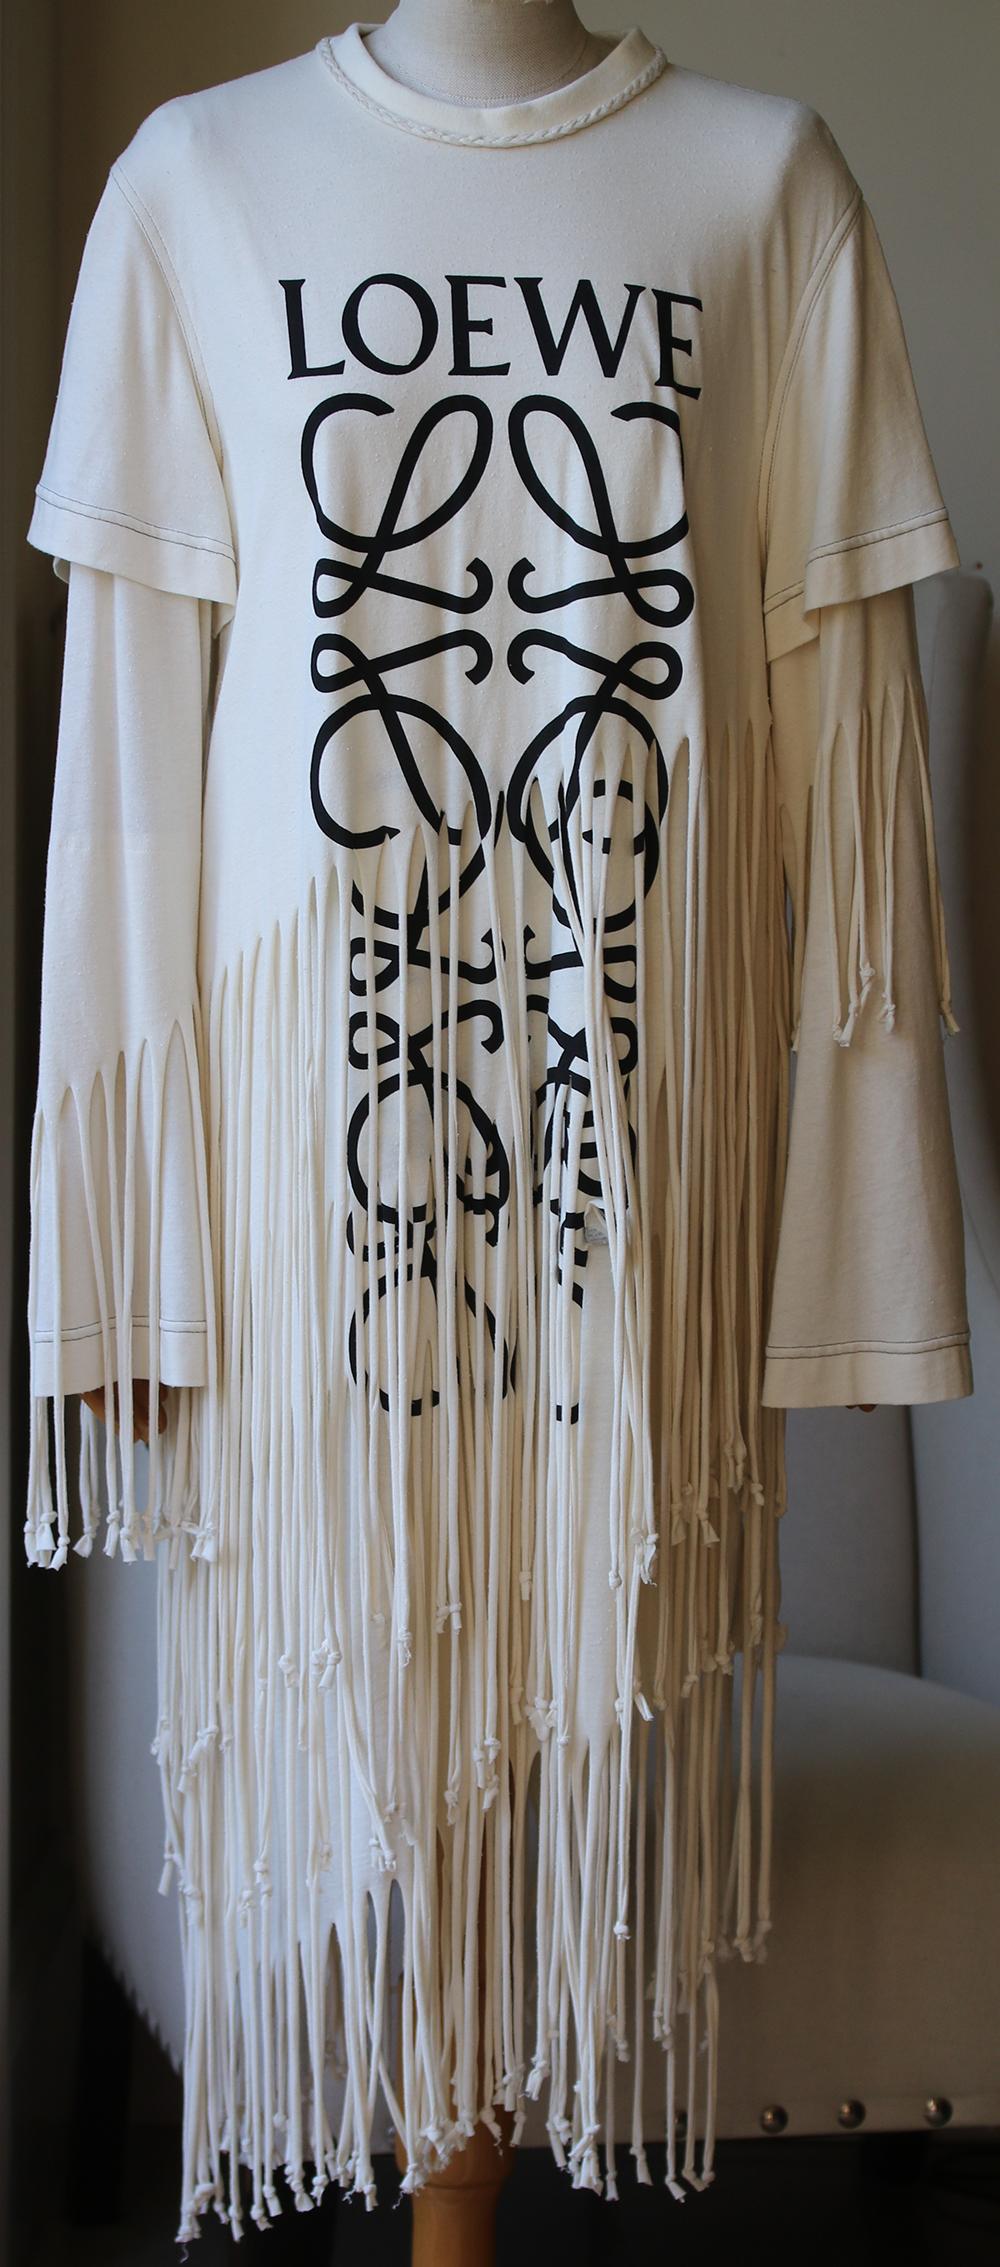 This Loewe Fringe T-Shirt Dress features a layered style with long & short sleeves, and the Loewe logo. Knotted fringe. Braided crewneck. Unlined. 50% Silk, 50% cotton. Colour: beige. Pull over. Made in Italy.

Size: Medium (UK 10, US 6, FR 38, IT